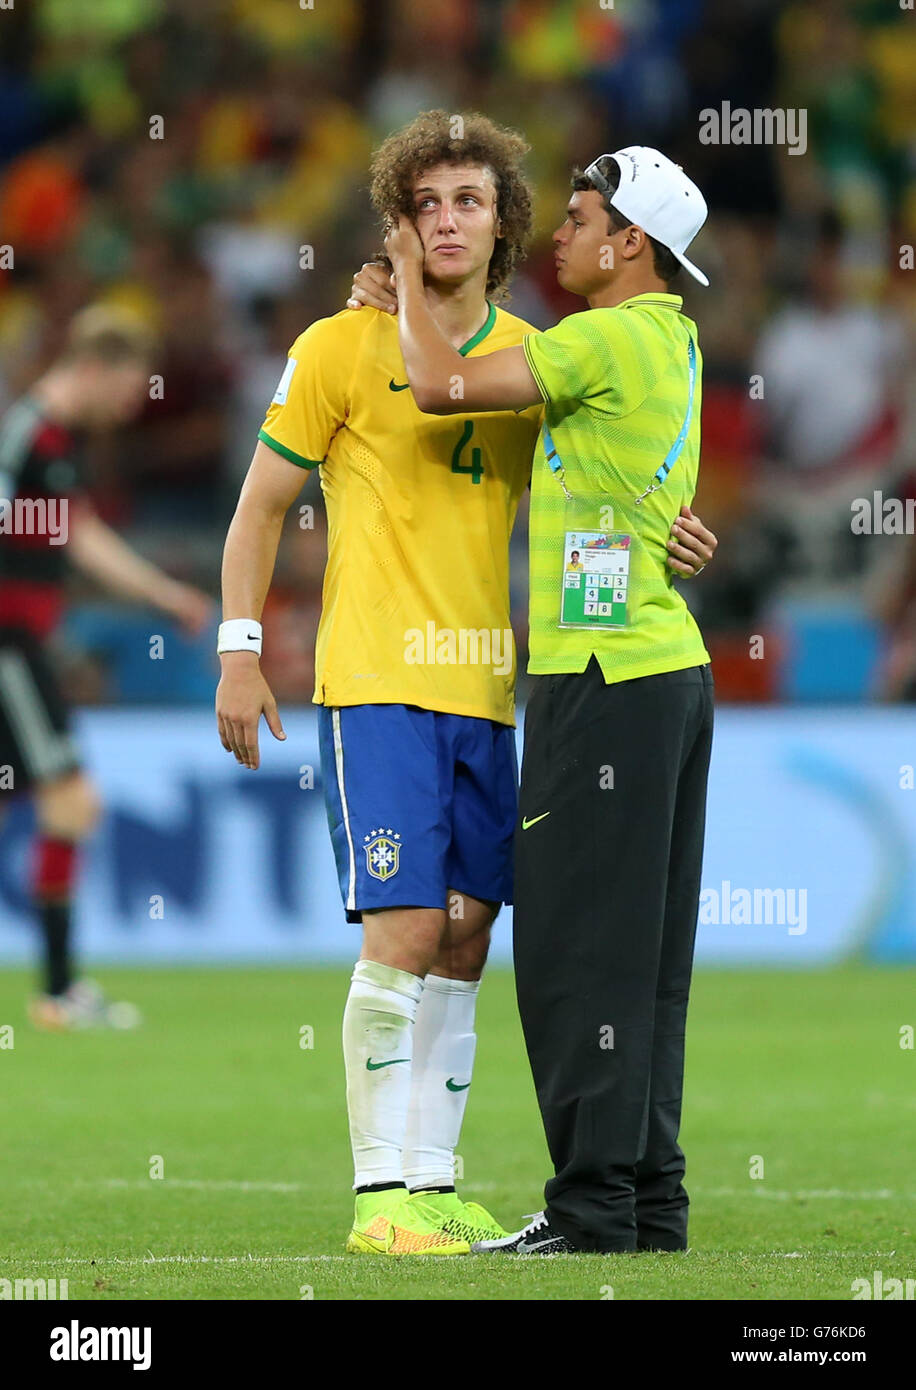 Brazil's David Luis (left) has to be consoled by teammate Thiago Silva (right) as he shows emotion after the final whistle during the FIFA World Cup Semi Final at Estadio Mineirao, Belo Horizonte, Brazil. Stock Photo